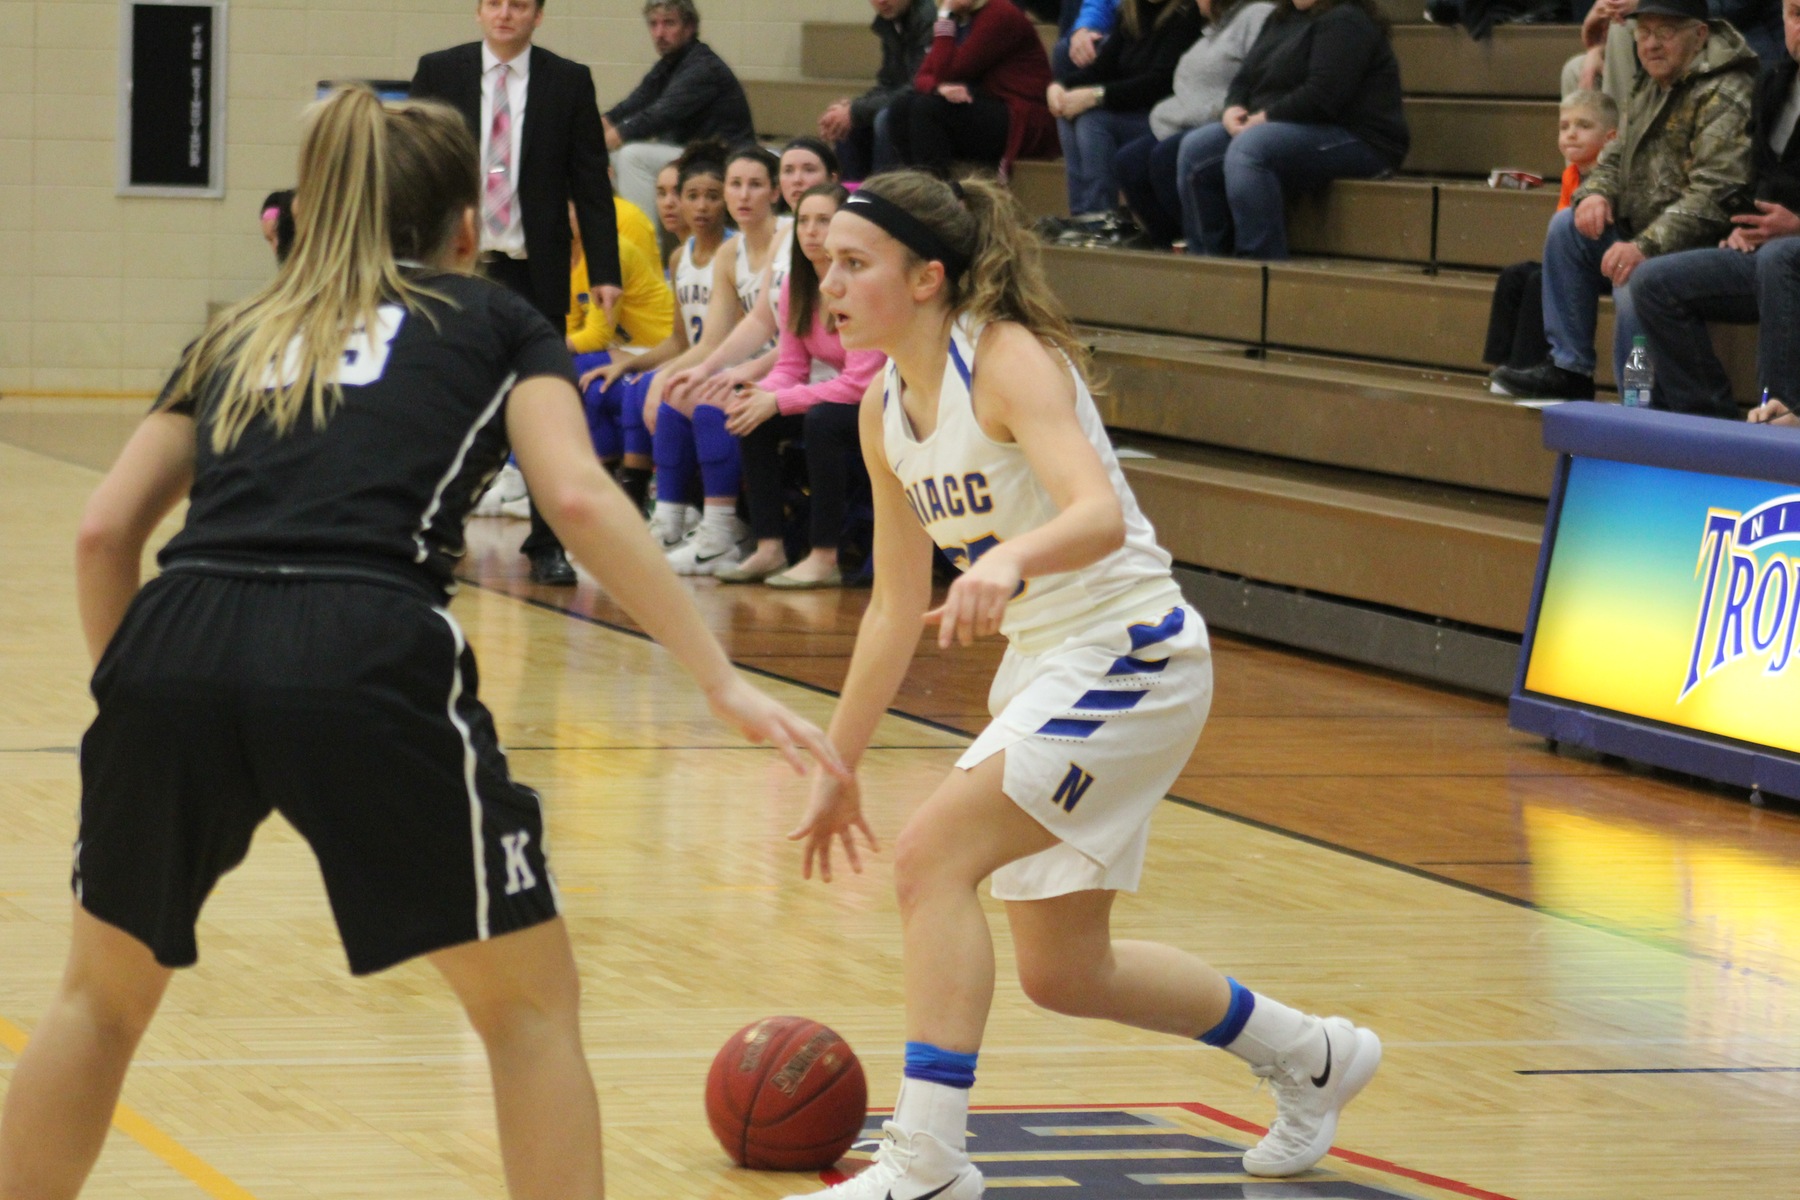 NIACC's Kelsie Willert looks to drive to the basket in Wednesday's game against Kirkwood.